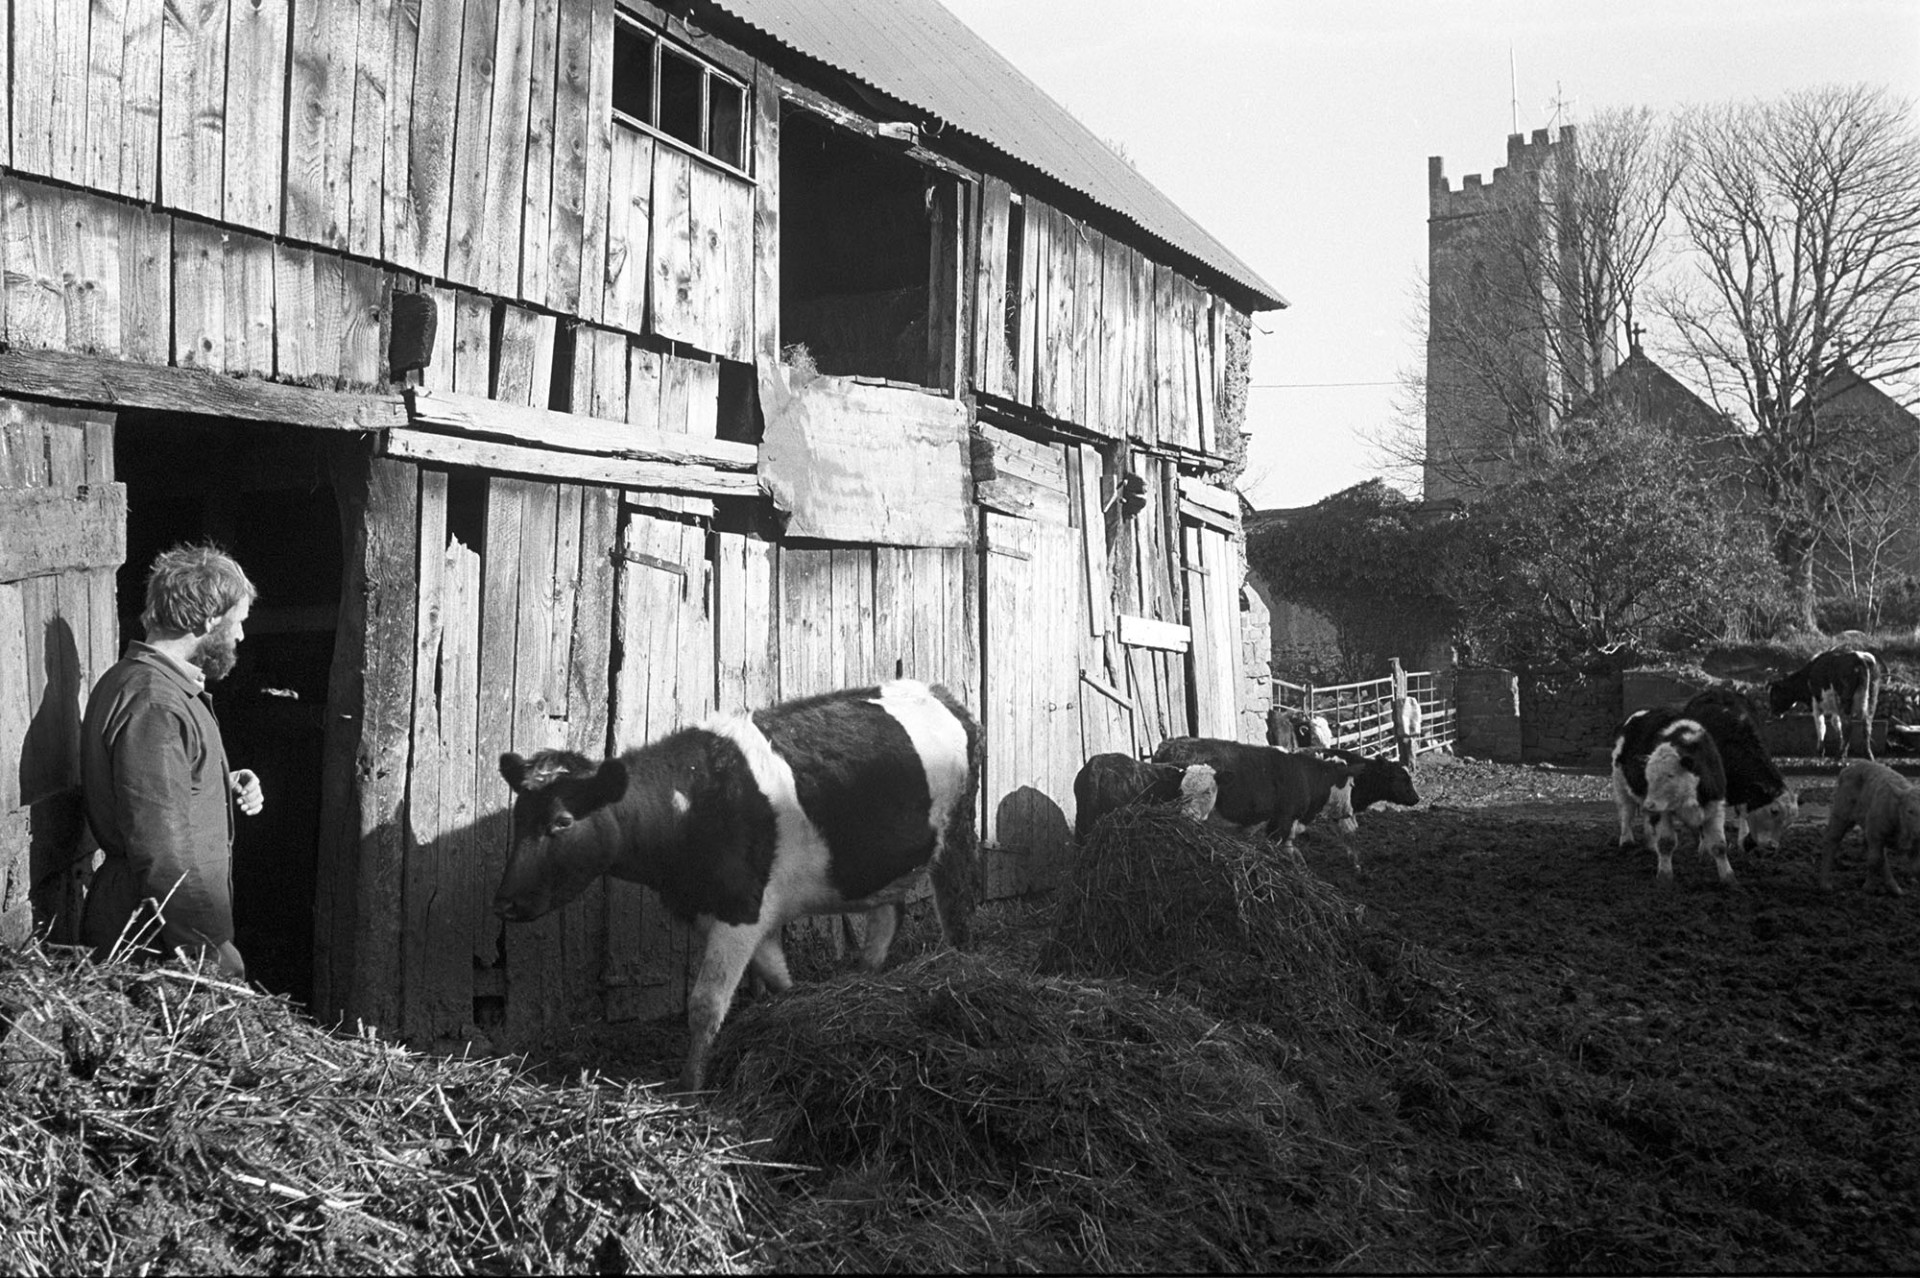 Farmer bringing in cows to feed their calves through yard with muckheaps, manure. 
[A man bringing cows into a muddy farmyard to feed their calves at The Barton, Burrington. They are walking past muckheaps or dung heaps of manure to a wooden barn. Burrington Church tower is visible in the background.]